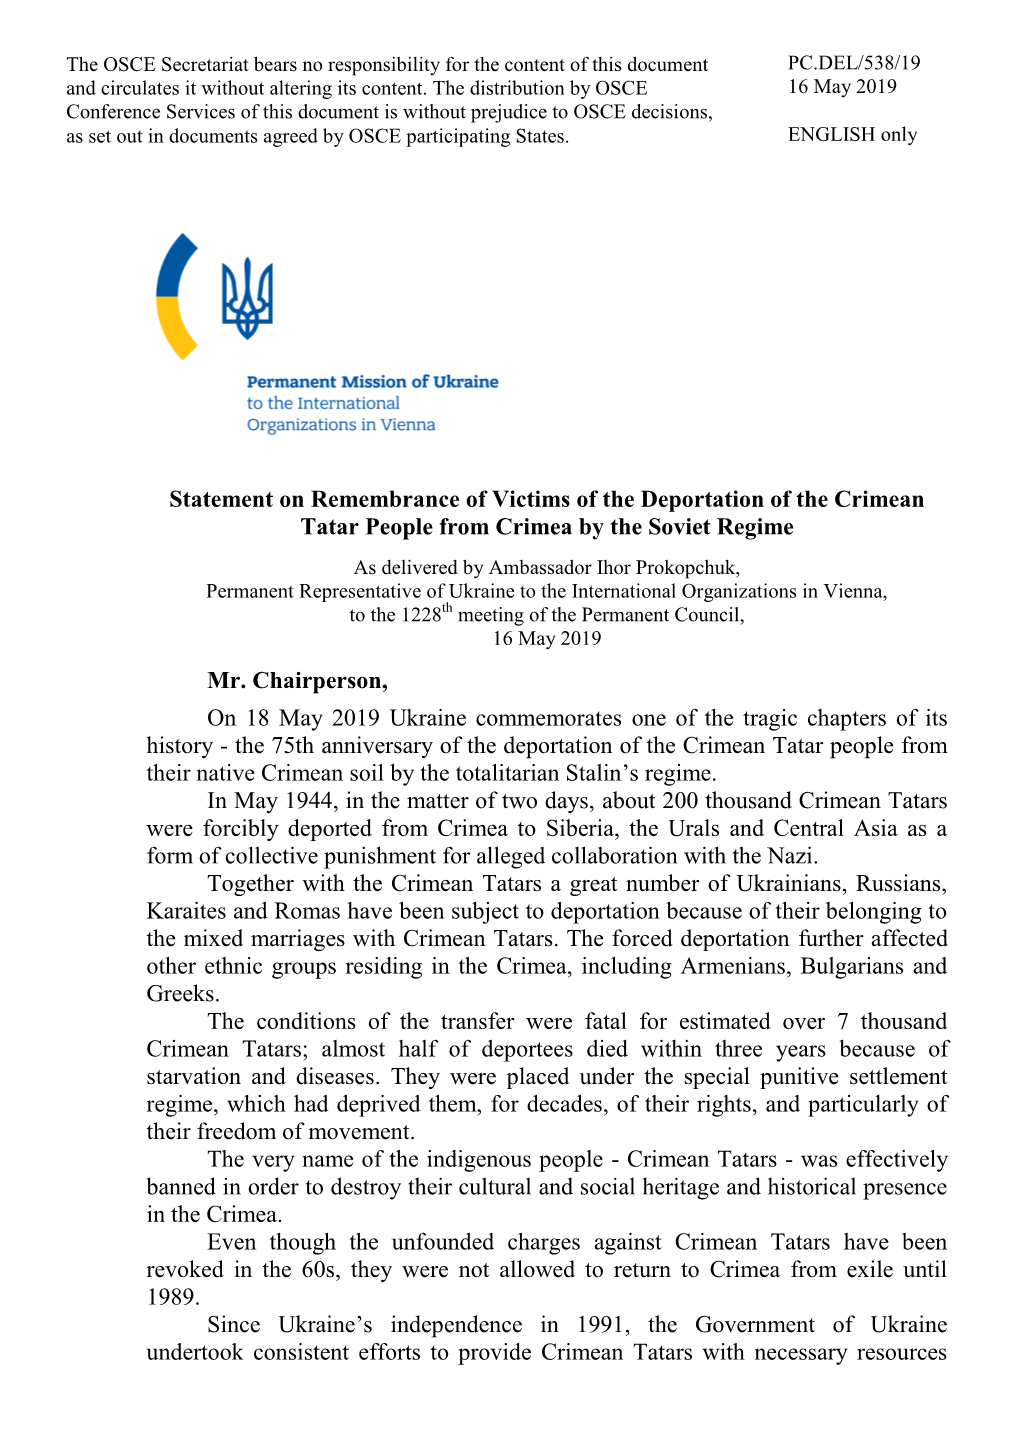 Statement on Remembrance of Victims of the Deportation of the Crimean Tatar People from Crimea by the Soviet Regime Mr. Chairper